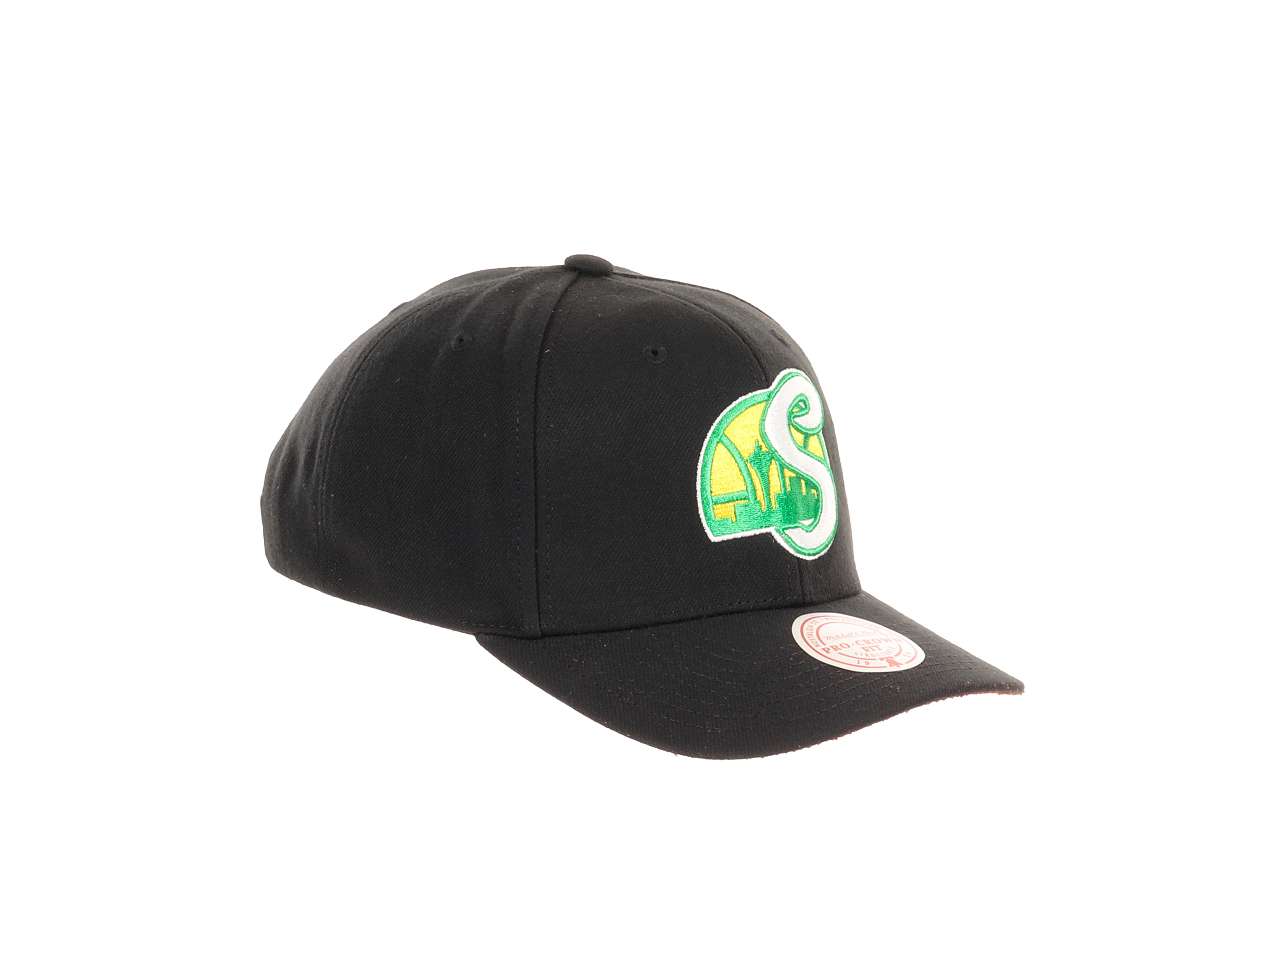 Seattle Supersonics NBA Icon Grail Pro Snapback Hardwood Claasic Cap Pro Crown Fit Black Mitchell & Ness